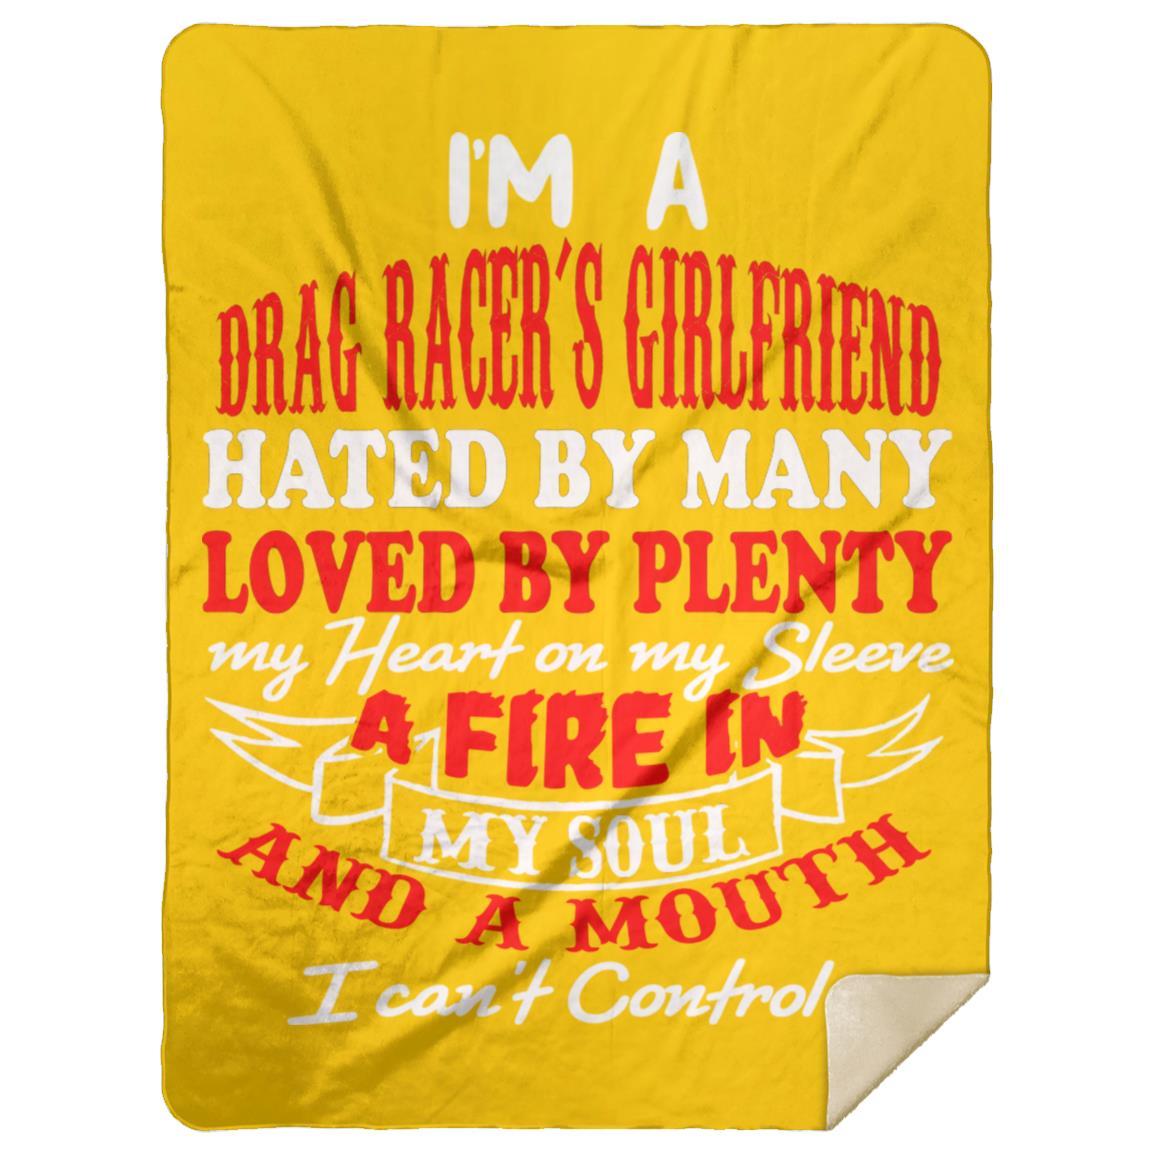 I'm A Drag Racer's Girlfriend Hated By Many Loved By Plenty Premium Mink Sherpa Blanket 60x80